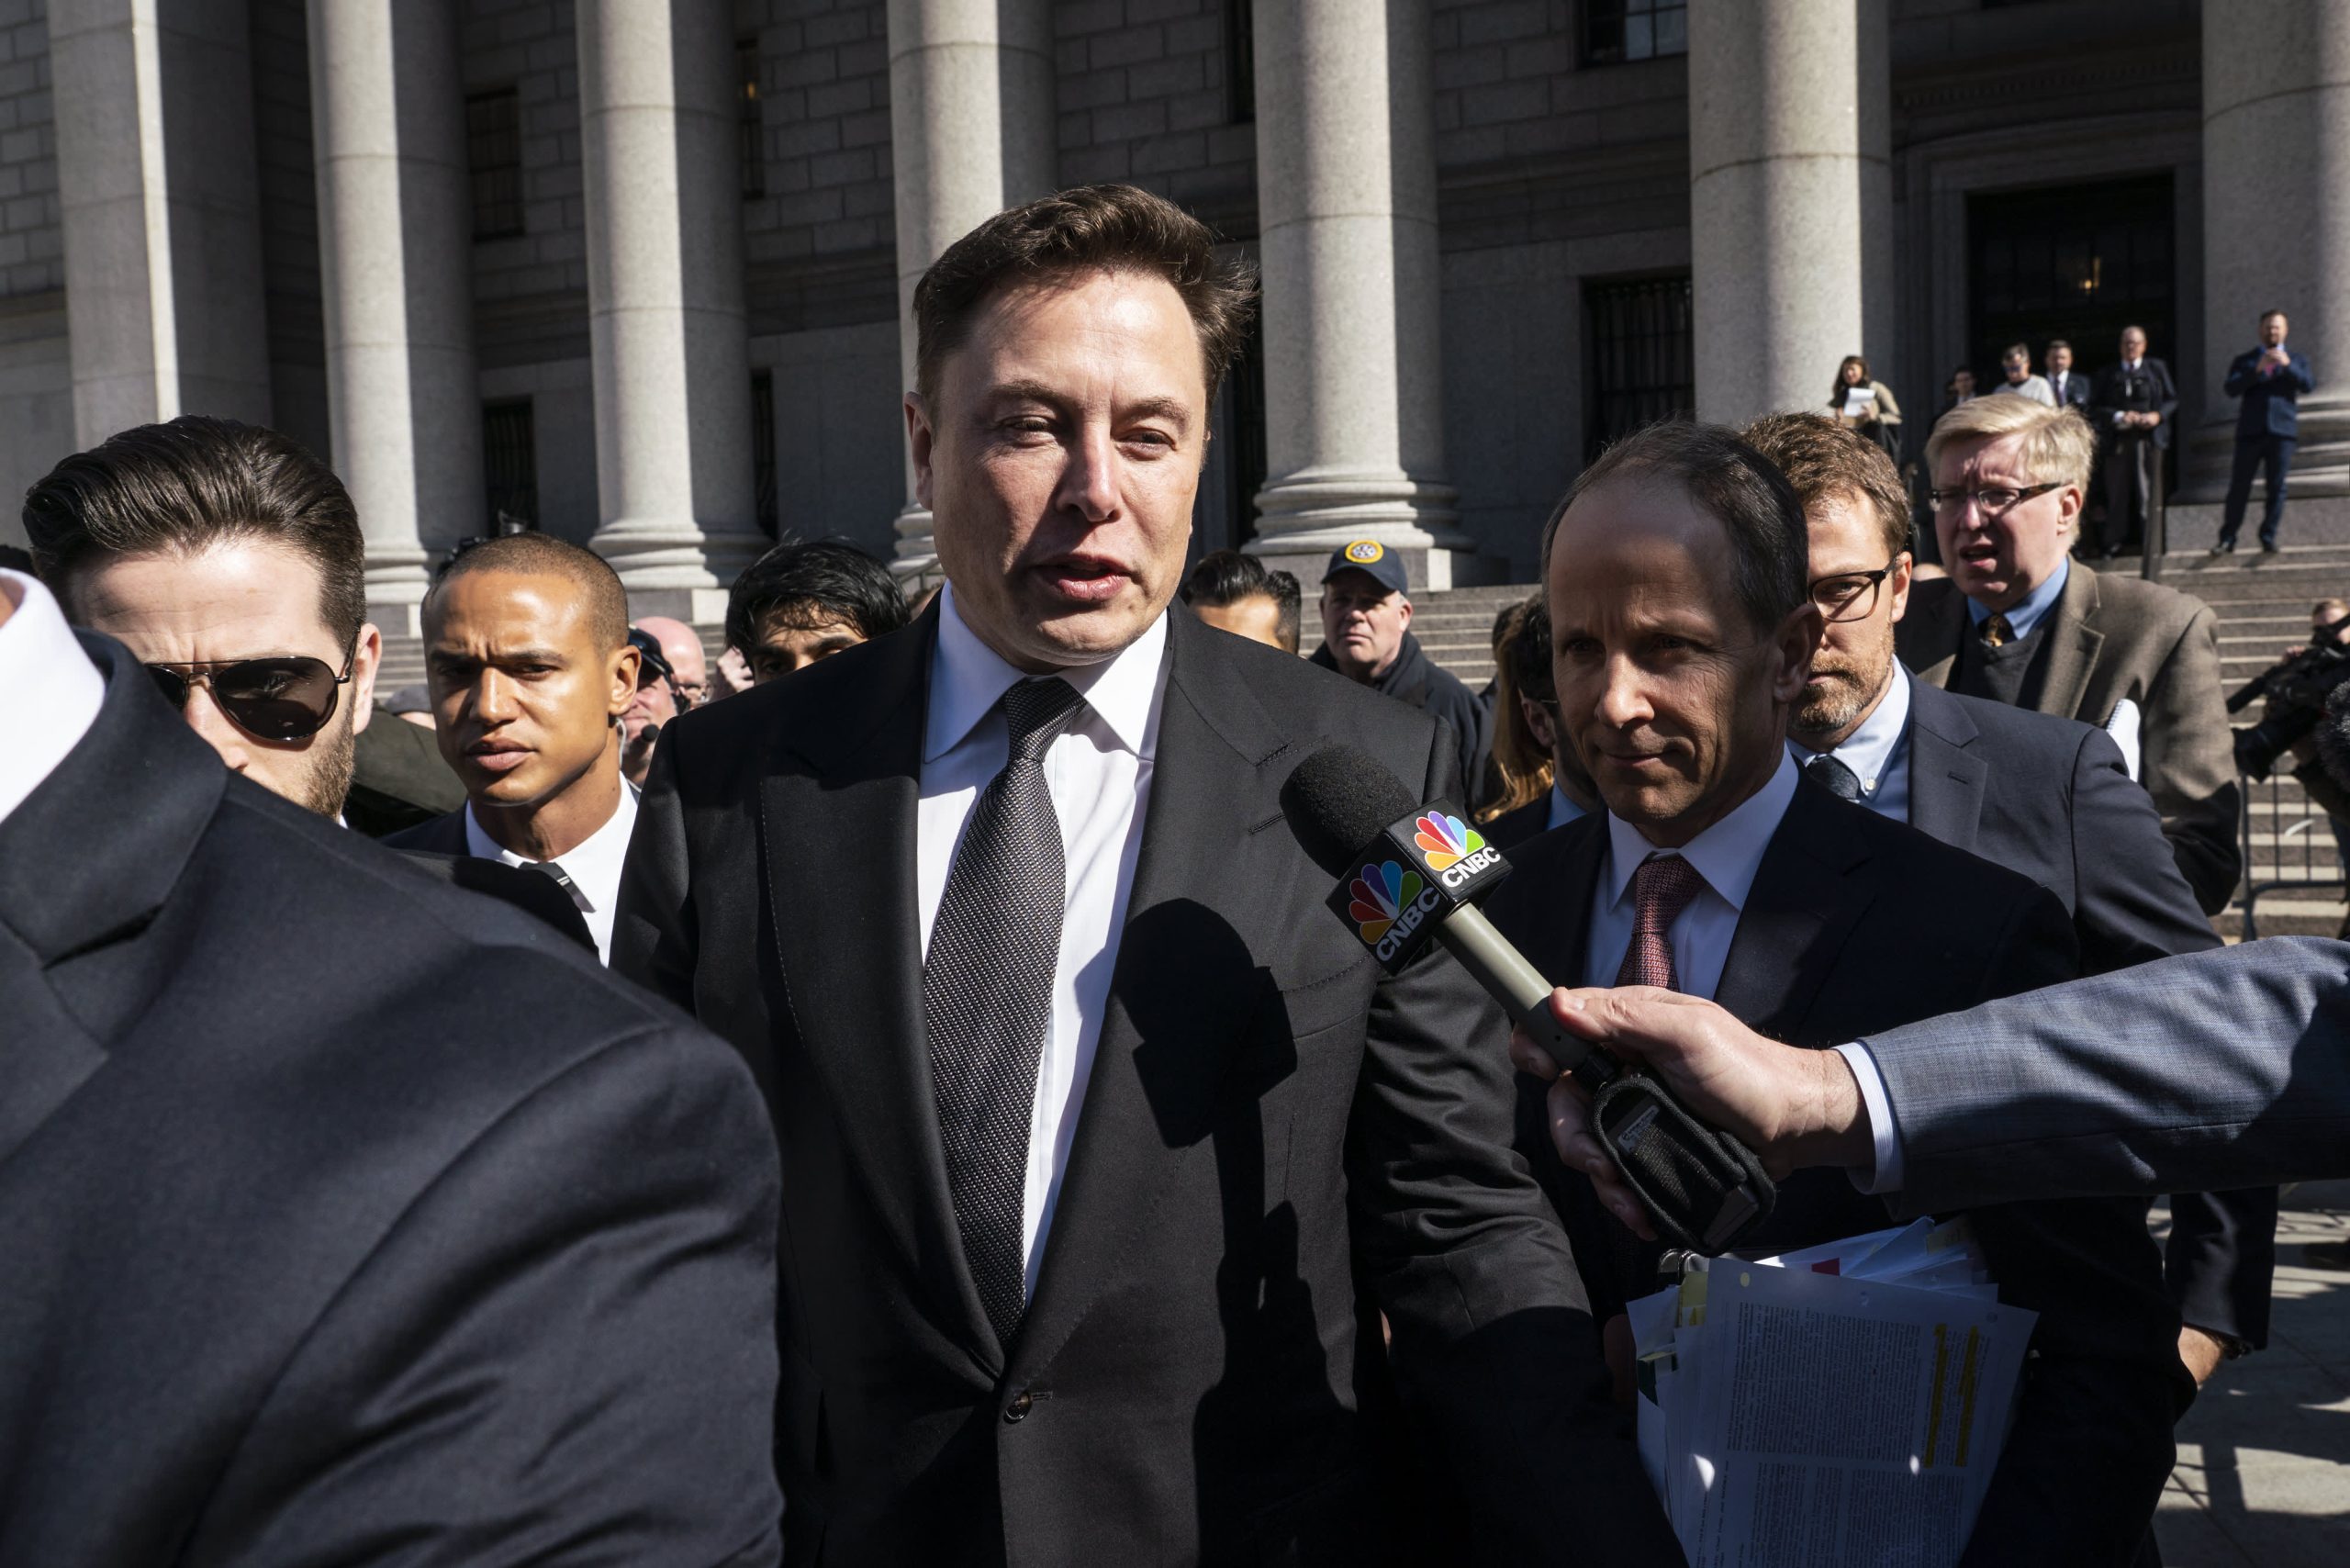 After Tesla CEO Elon Musk claims an "unrelenting investigation", the SEC . backtracks